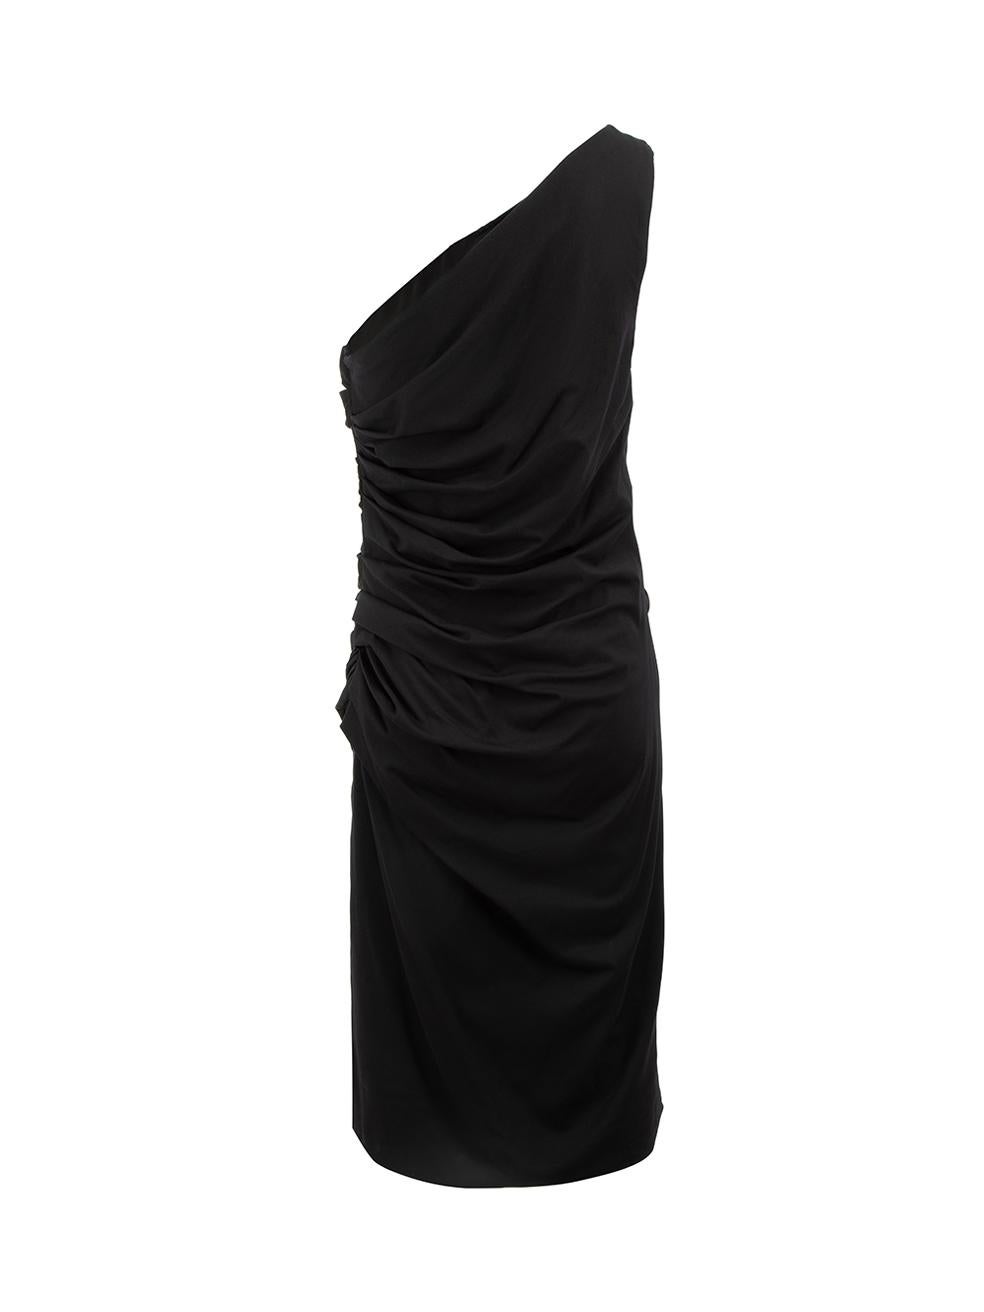 Sportmax Black One-Shoulder Ruffle Dress Size L In Good Condition In London, GB